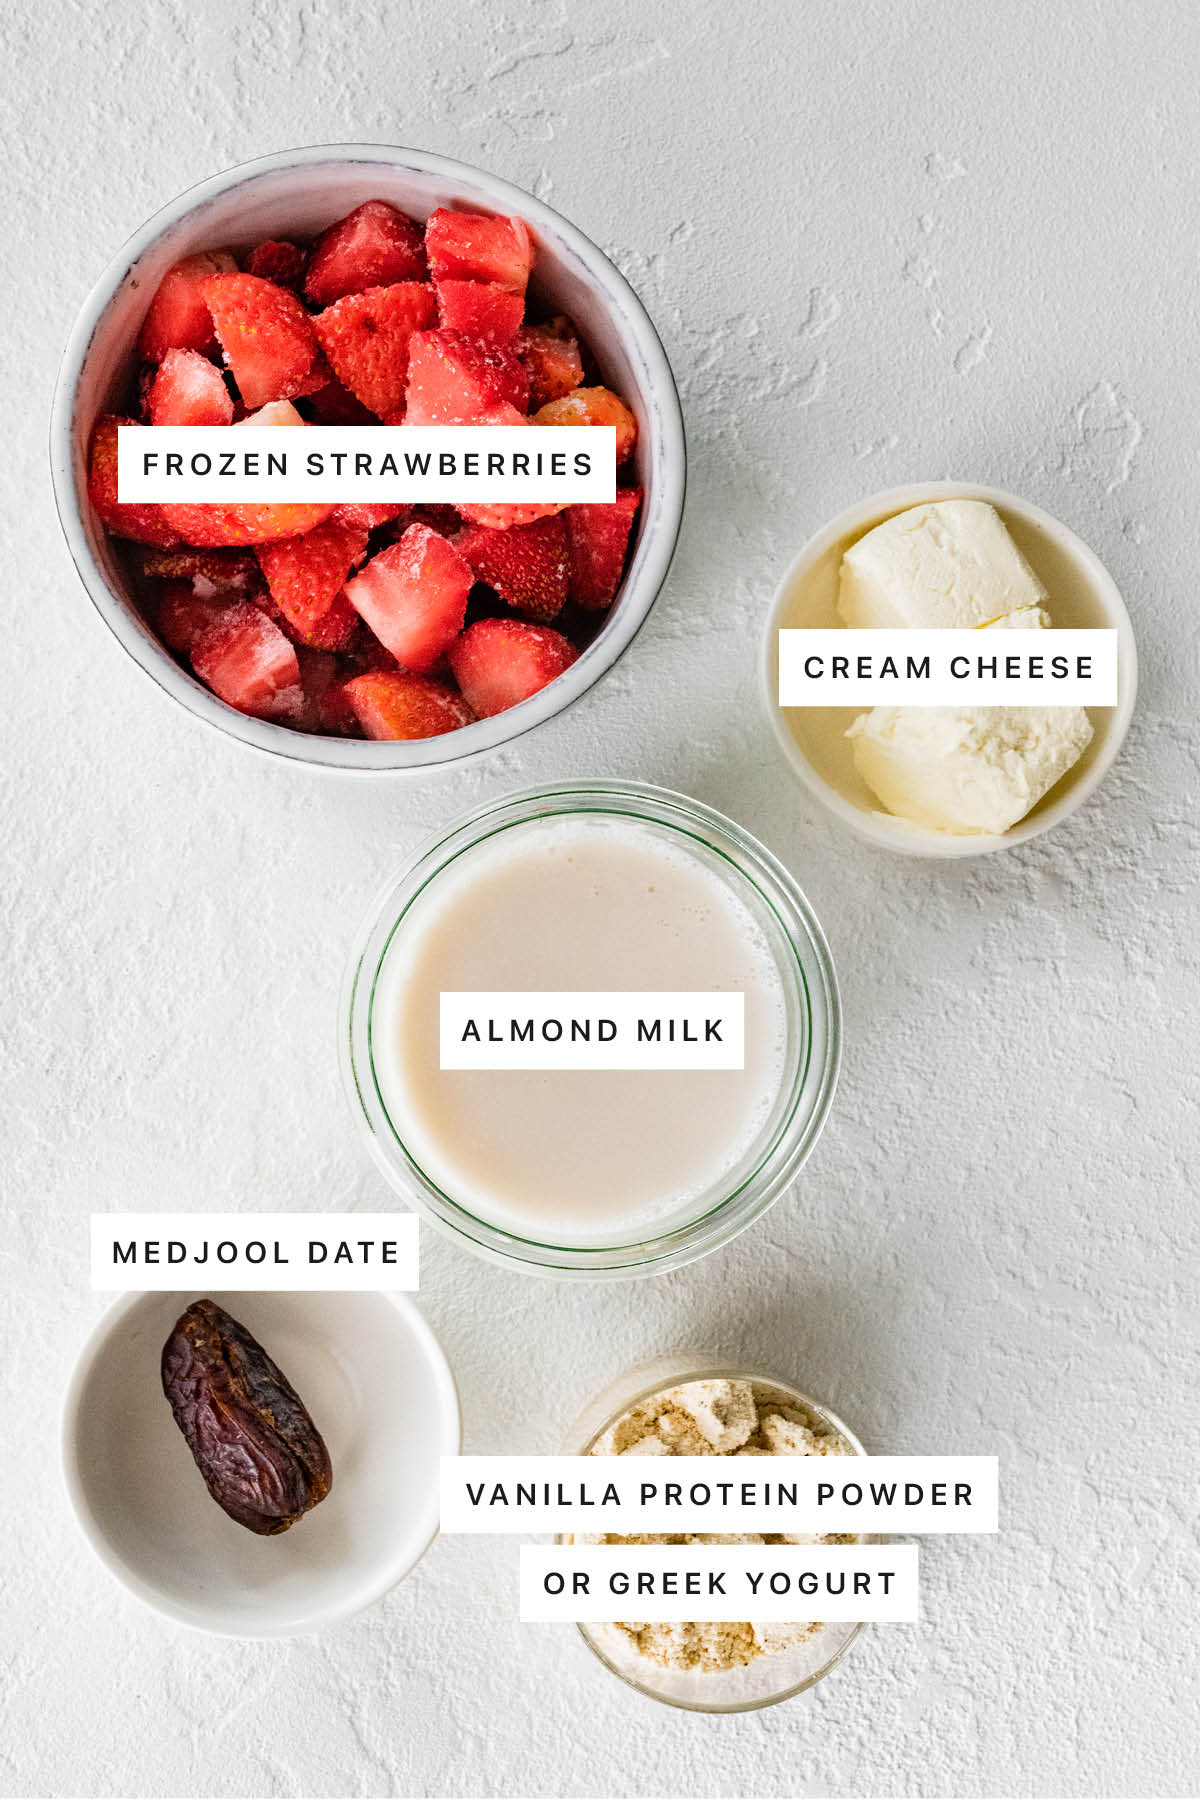 Ingredients measured out to make a Strawberry Cheesecake Smoothie: frozen strawberries, cream cheese, almond milk, medjool date and vanilla protein powder.